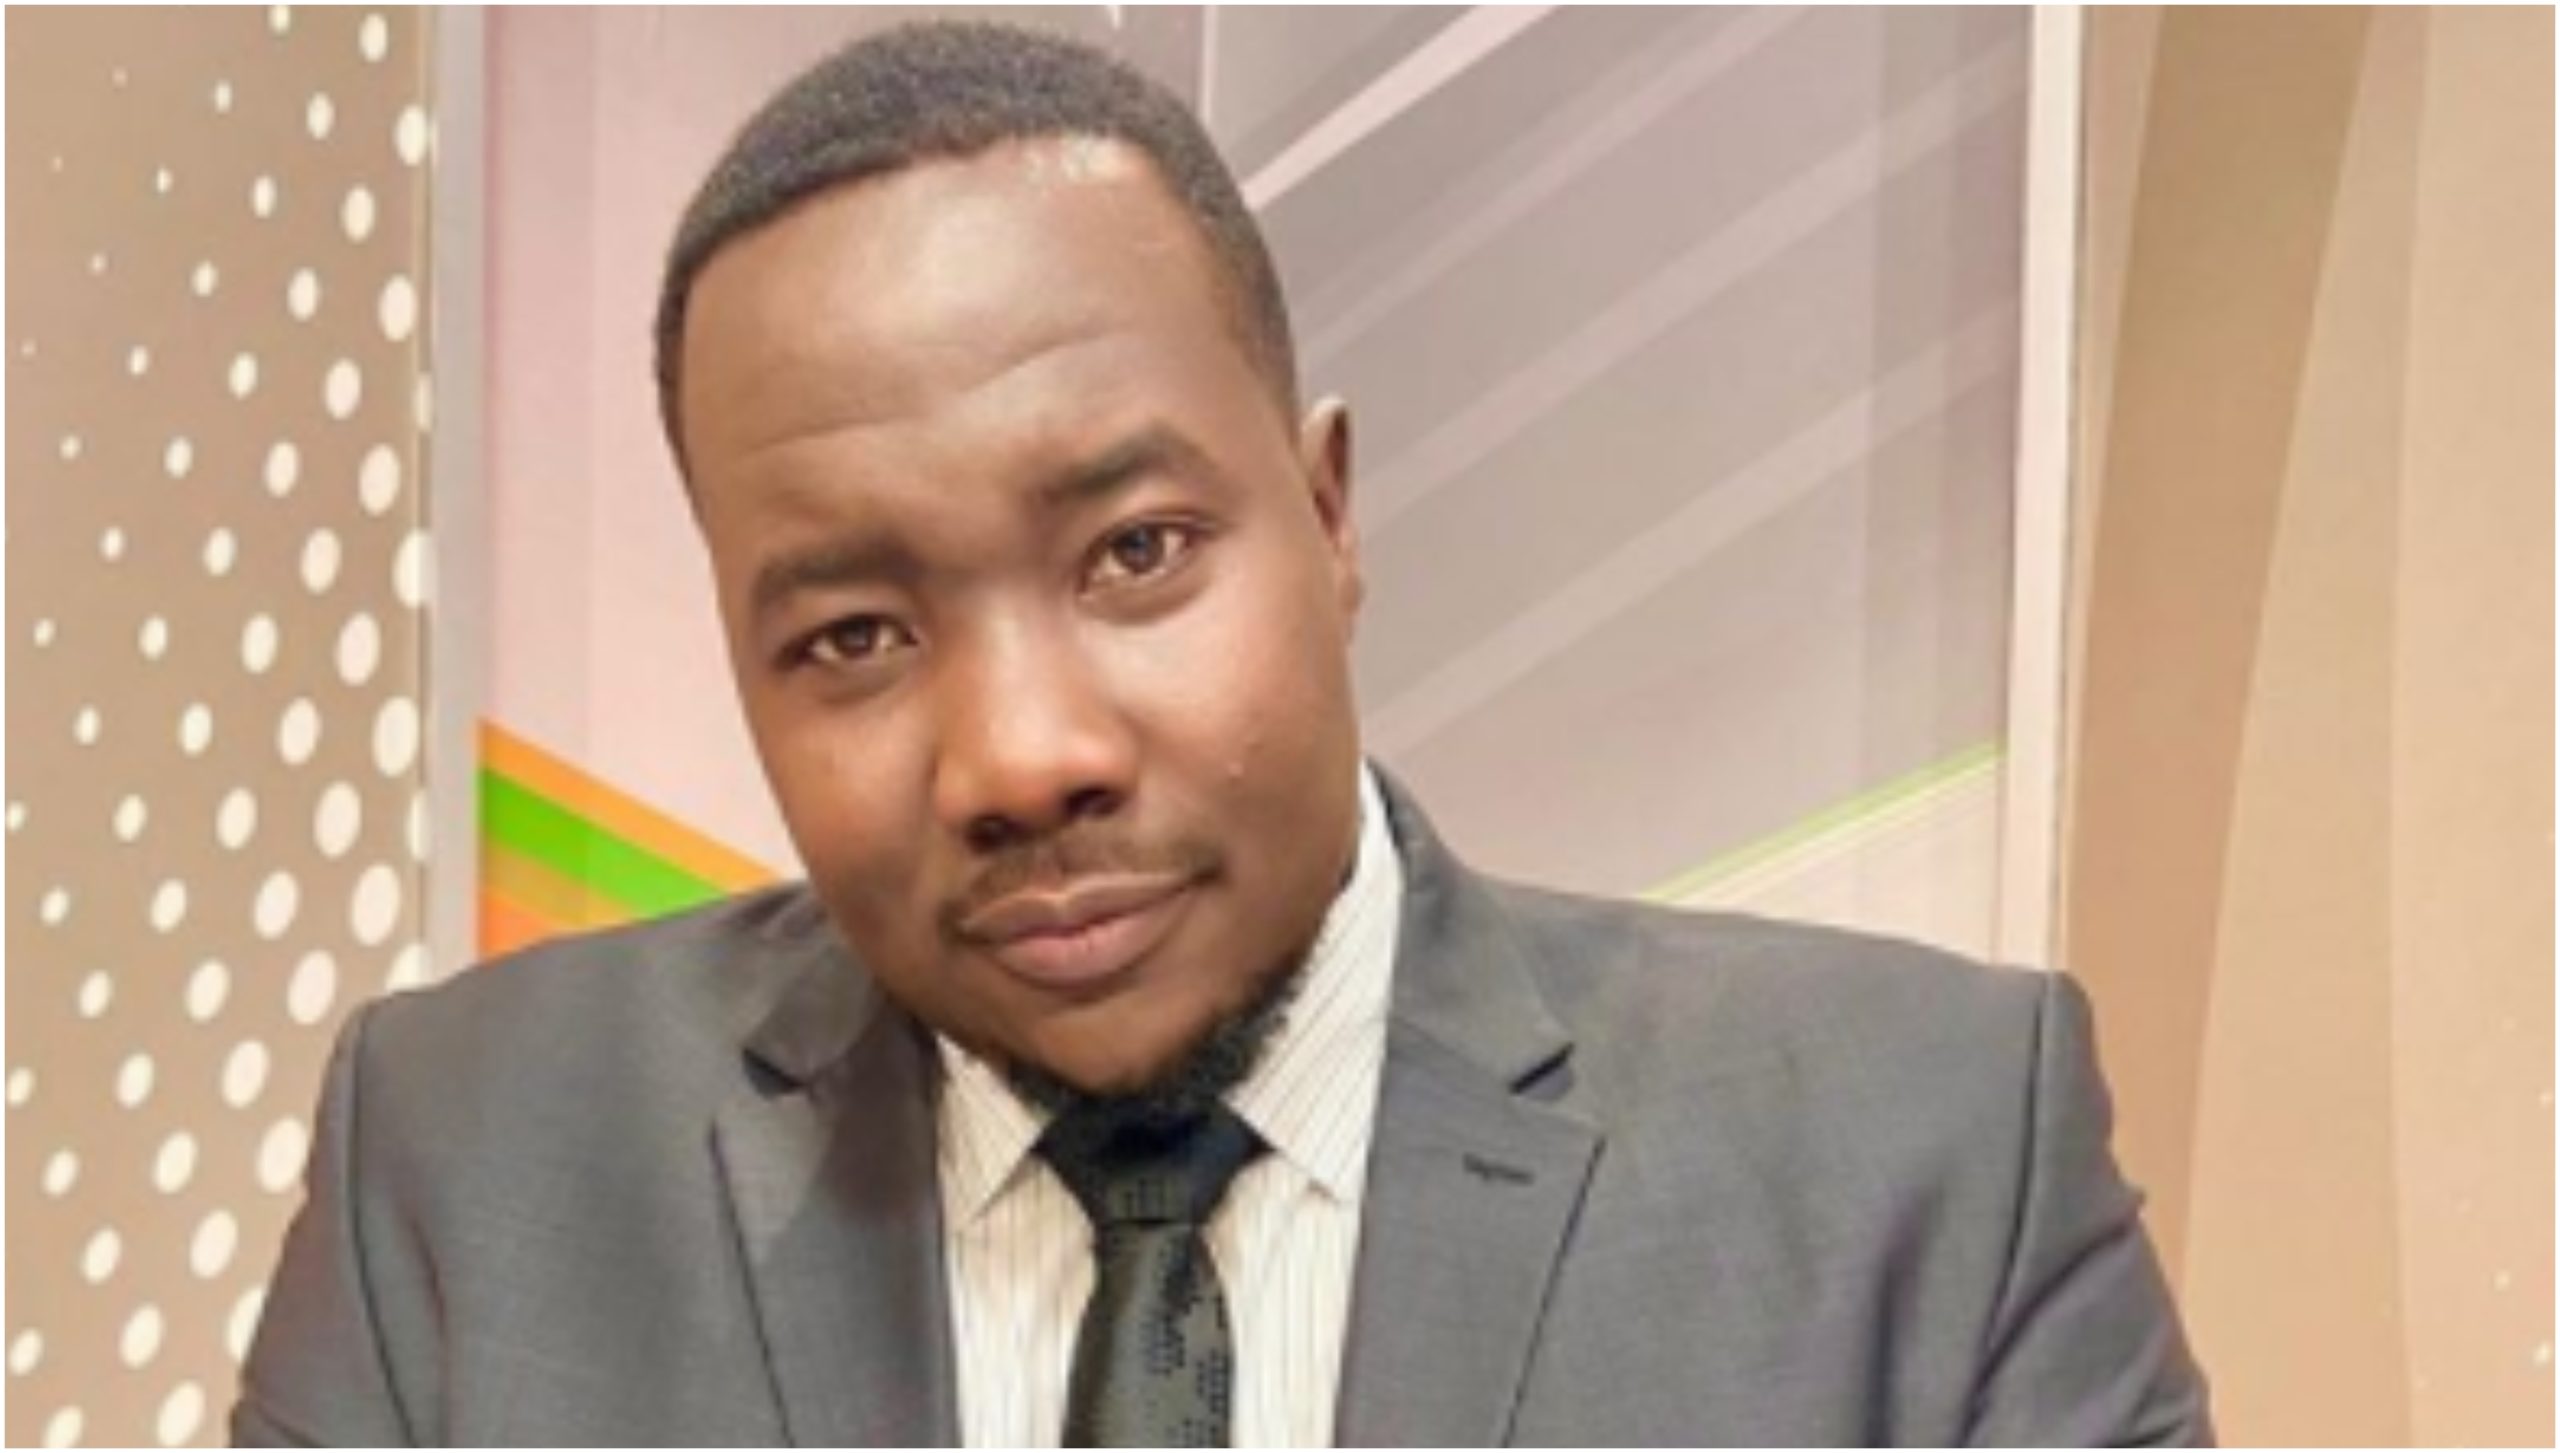 Willis Raburu savagely exposed after lying about his humble beginnings at Citizen TV